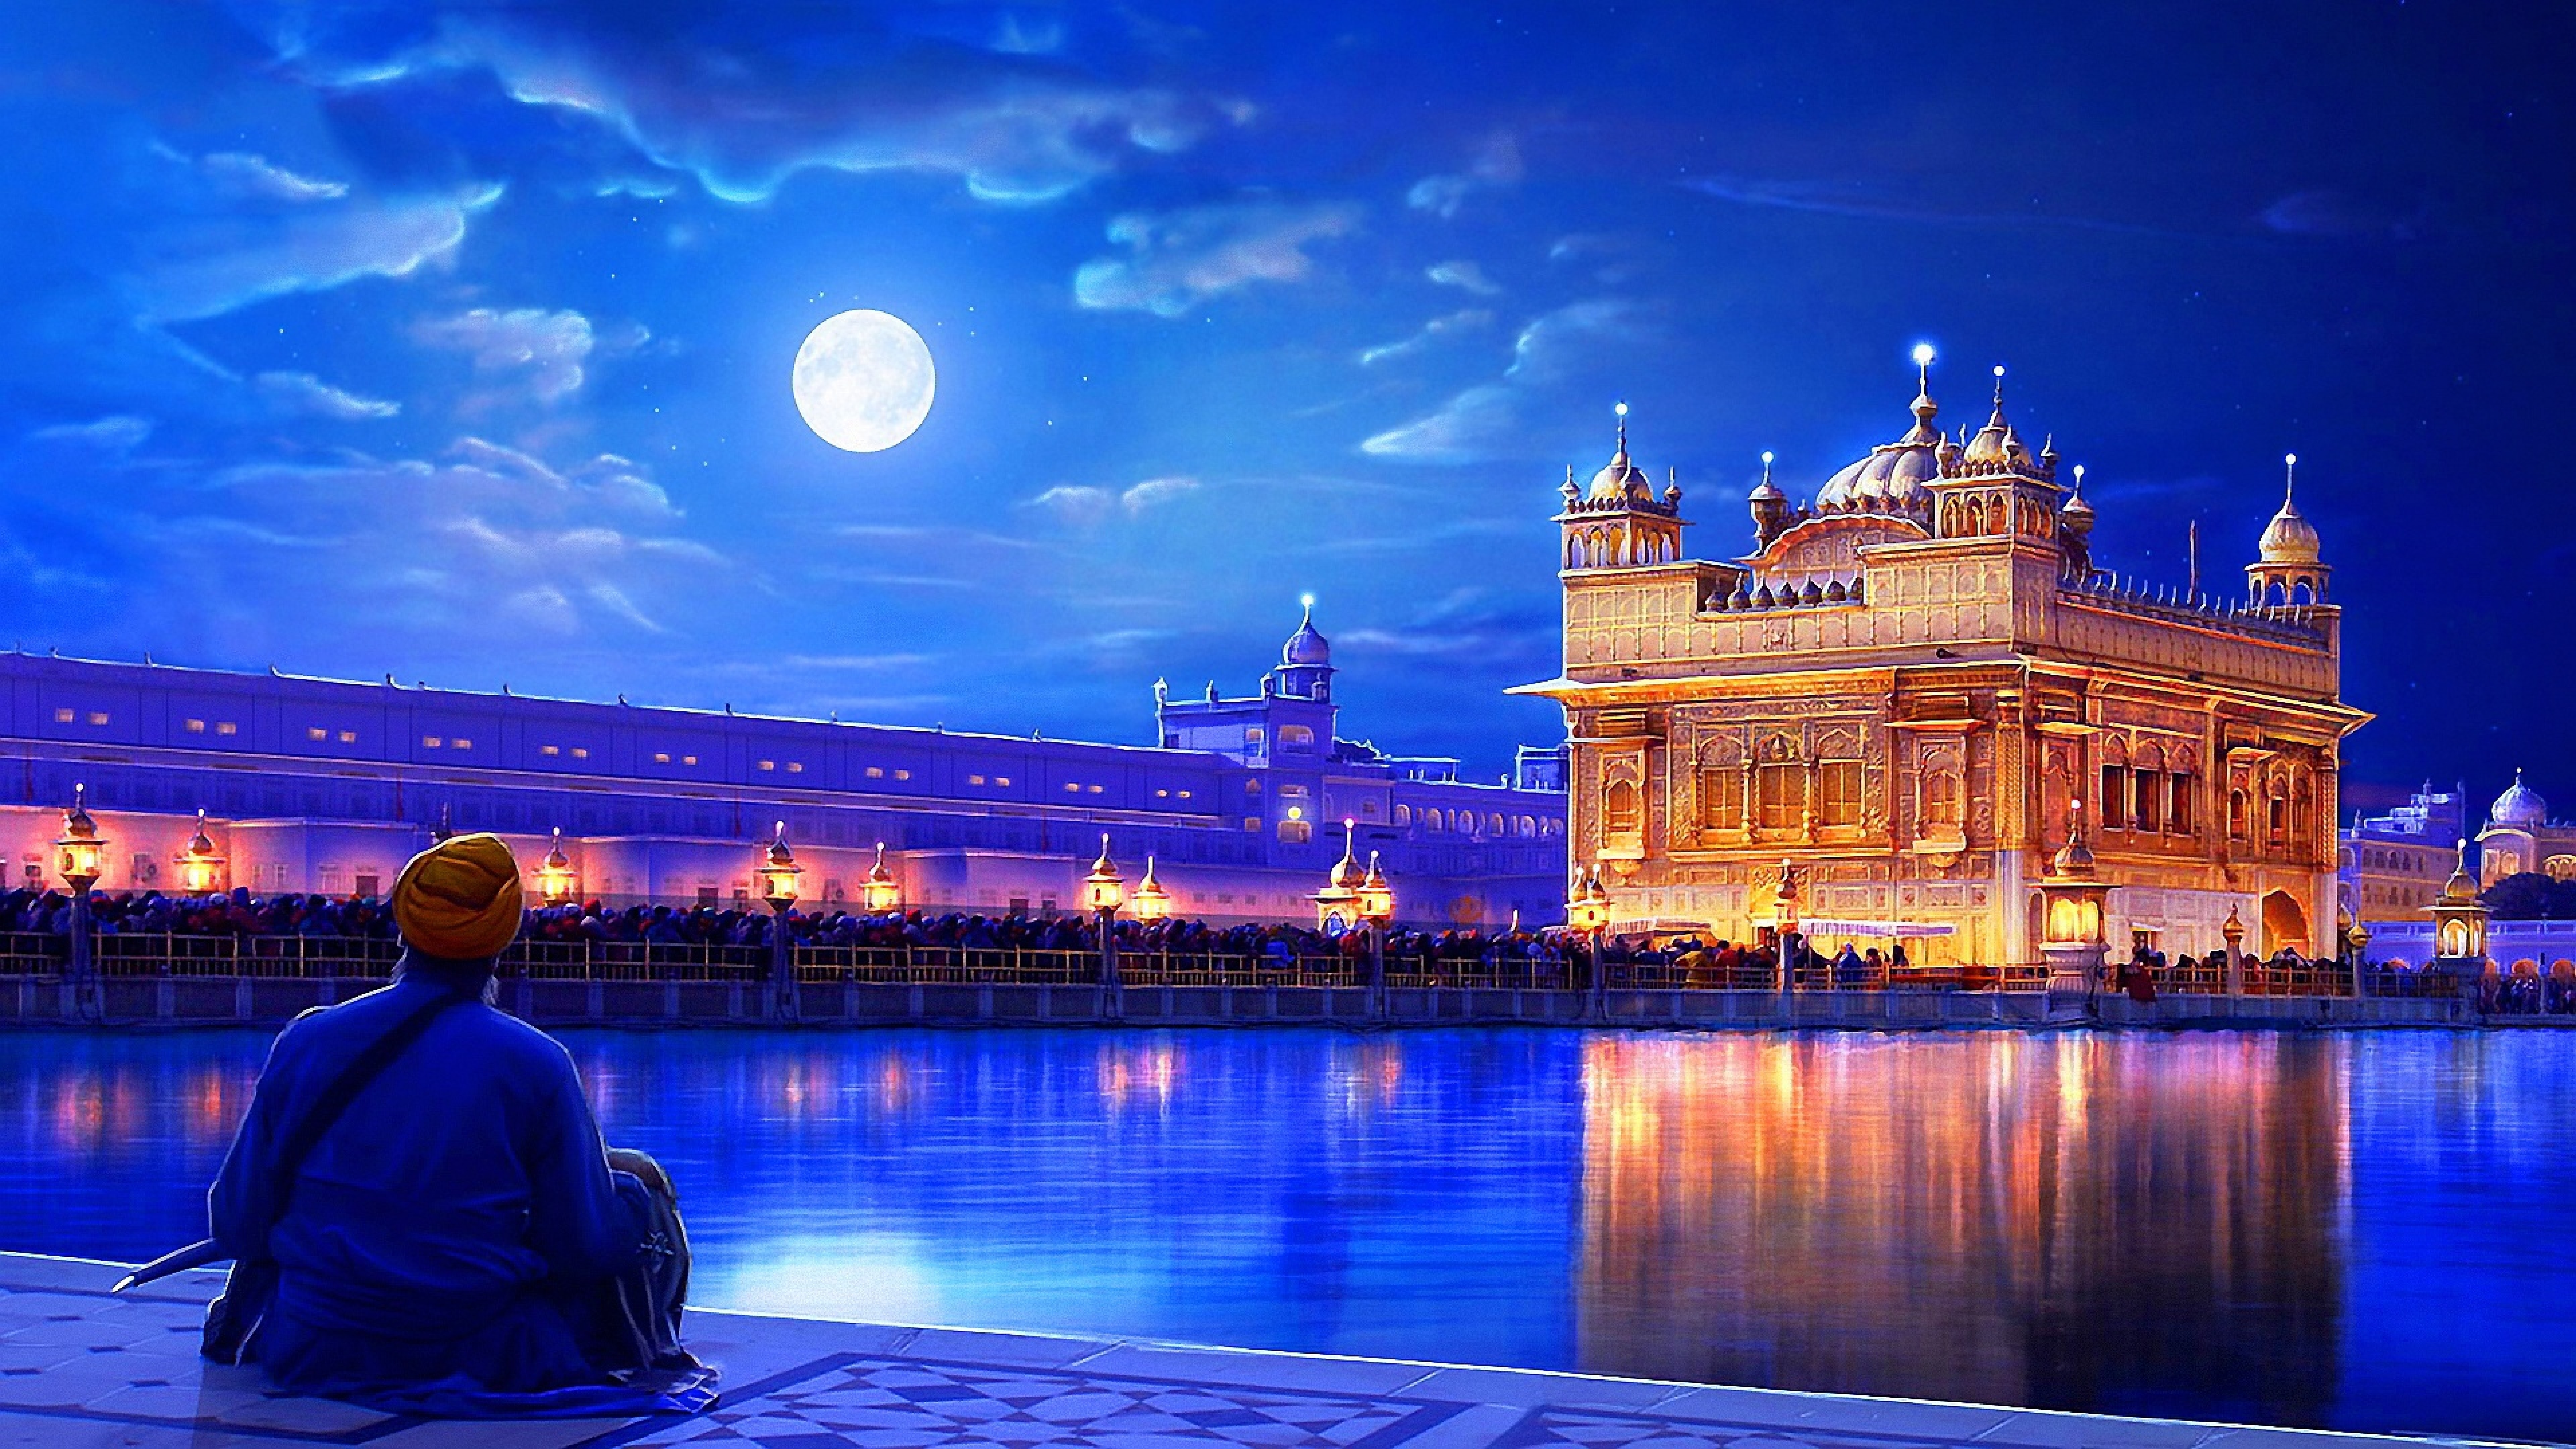 Golden Temple Amritsar India for 7680 x 4320 8K Ultra HD resolution